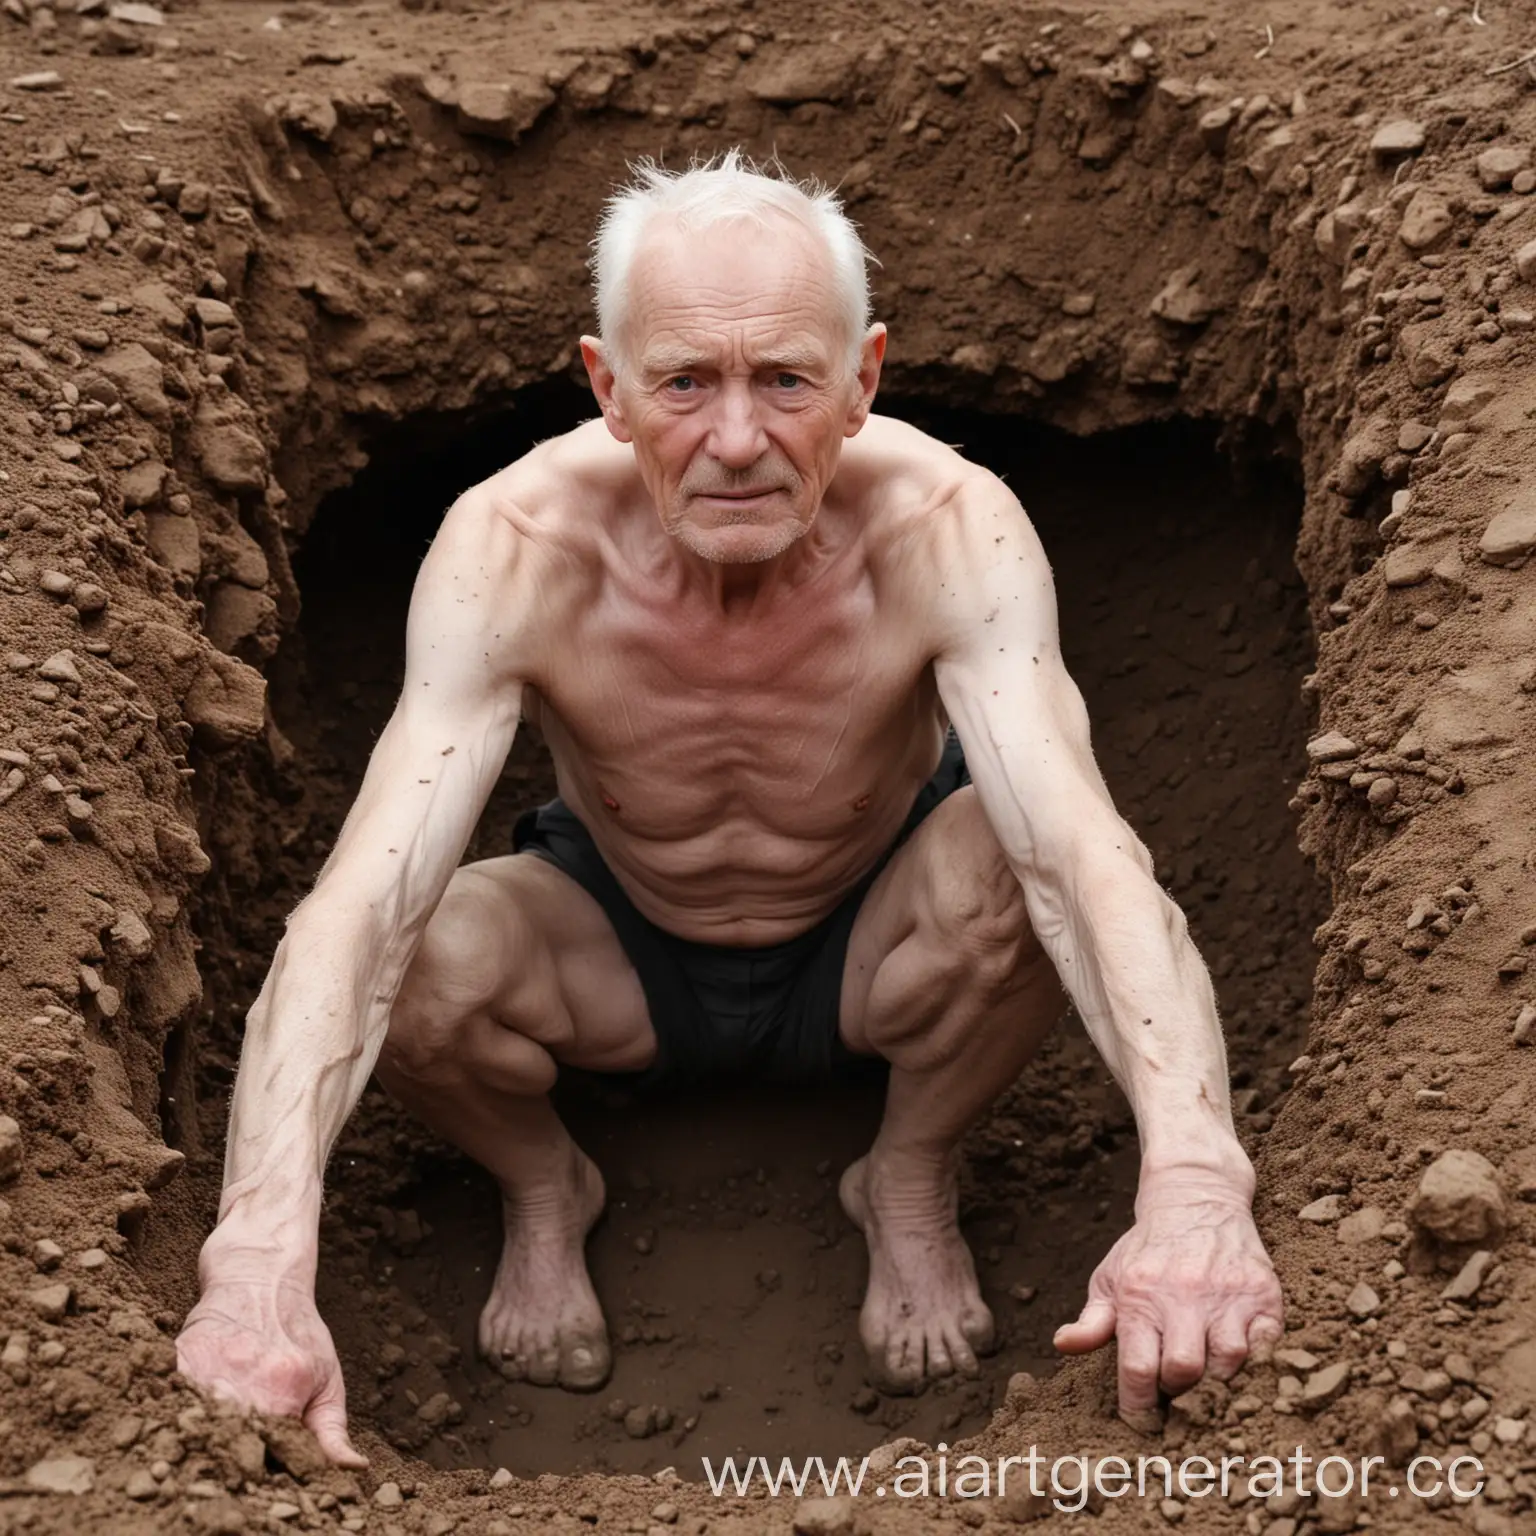 Elderly-Man-Emerging-from-Underground-with-Wrinkled-Brows-and-Muscles